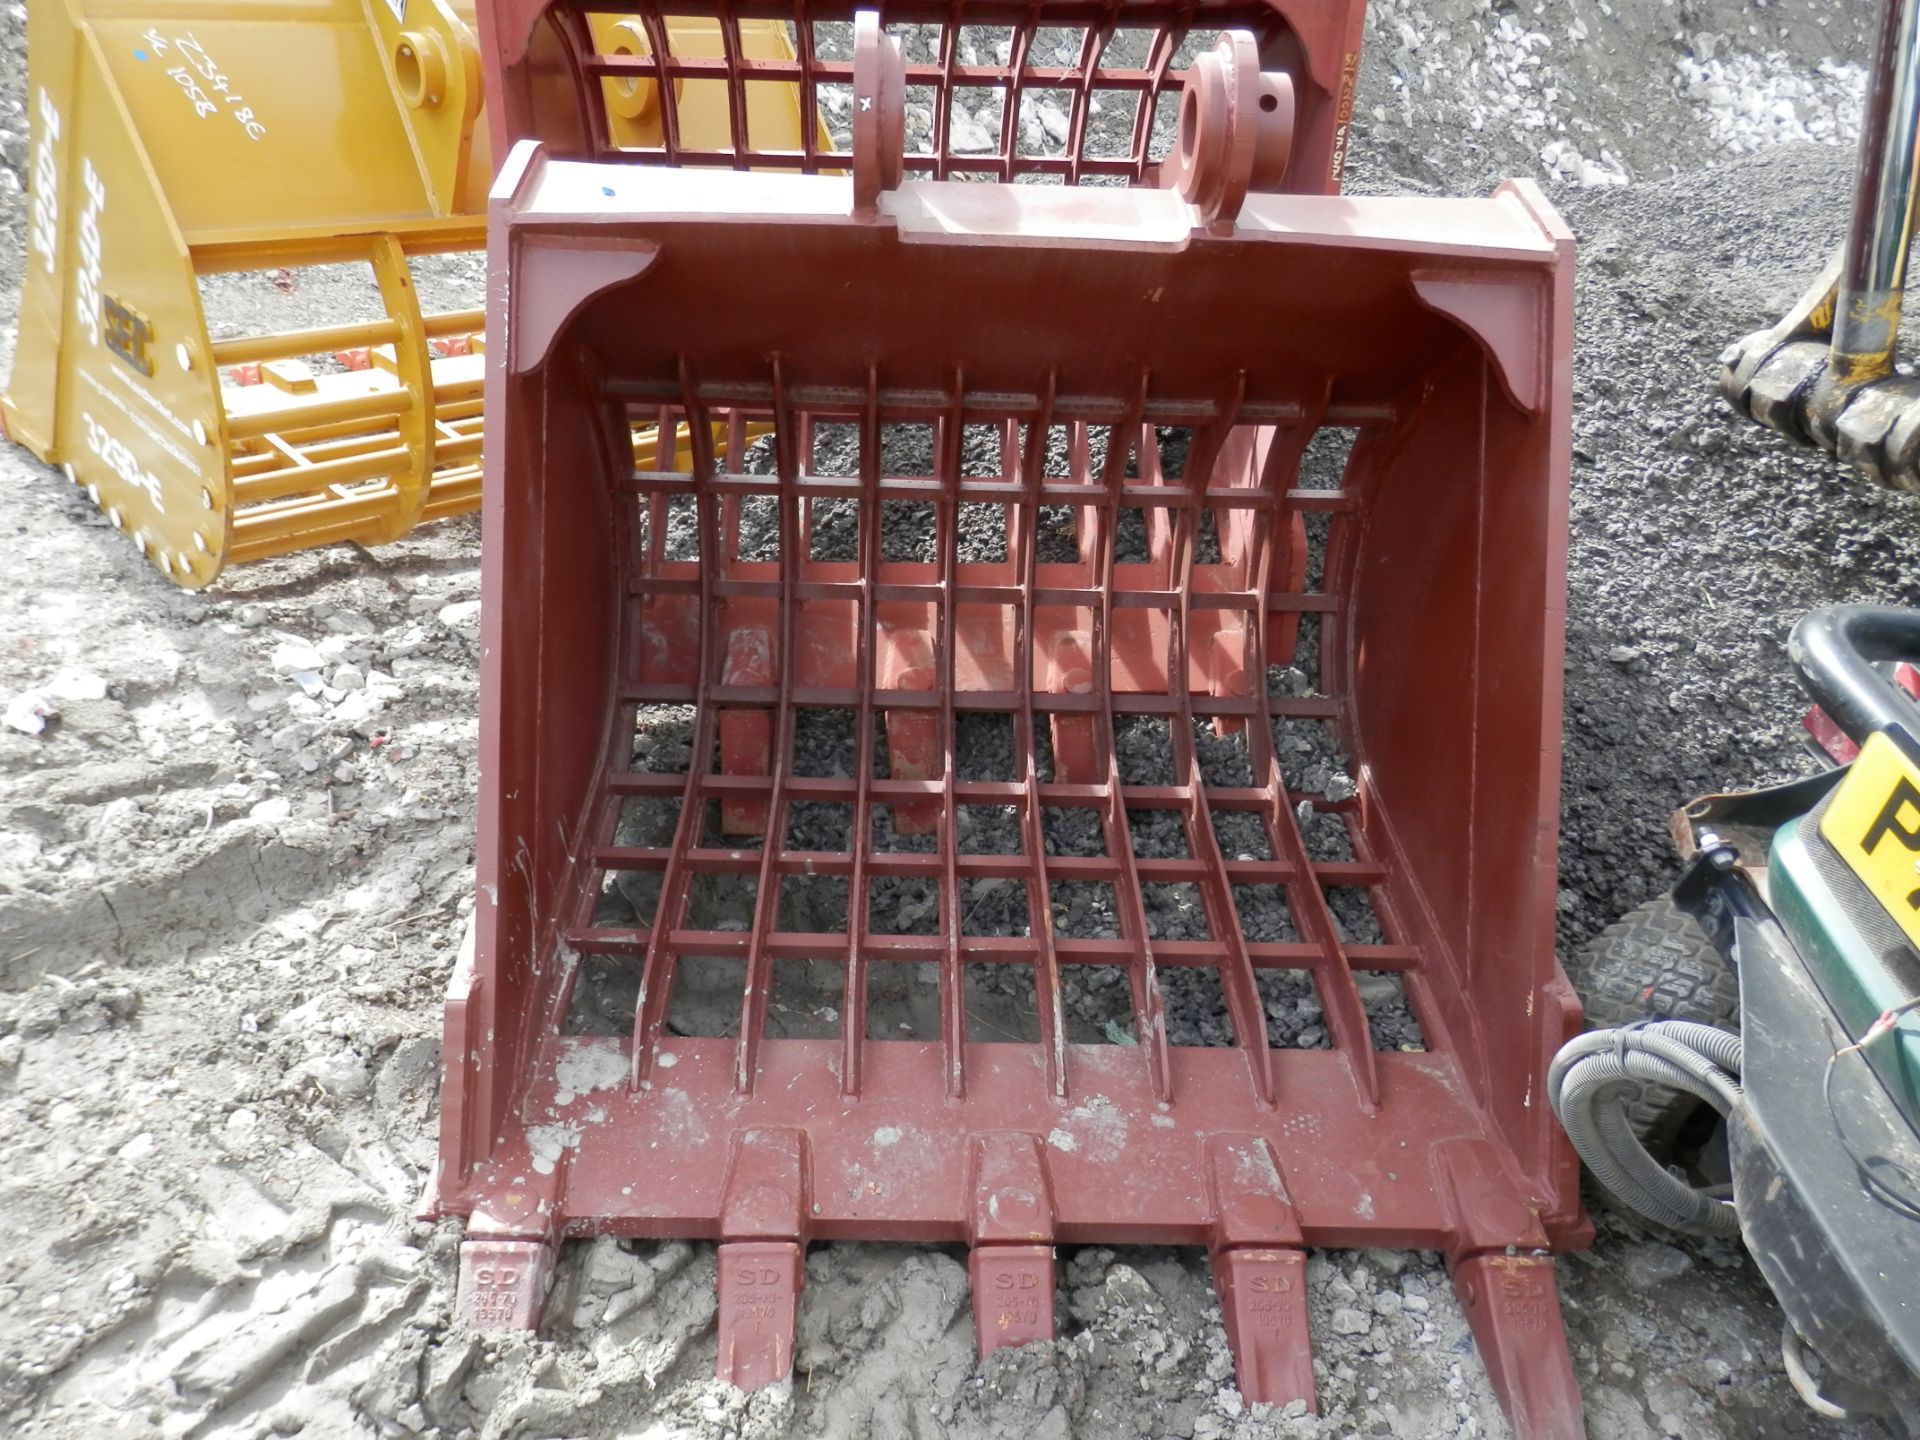 1 X RIDDLE BUCKET TO FIT KOMATSU DIGGER. NEW & UNUSED - Image 2 of 3